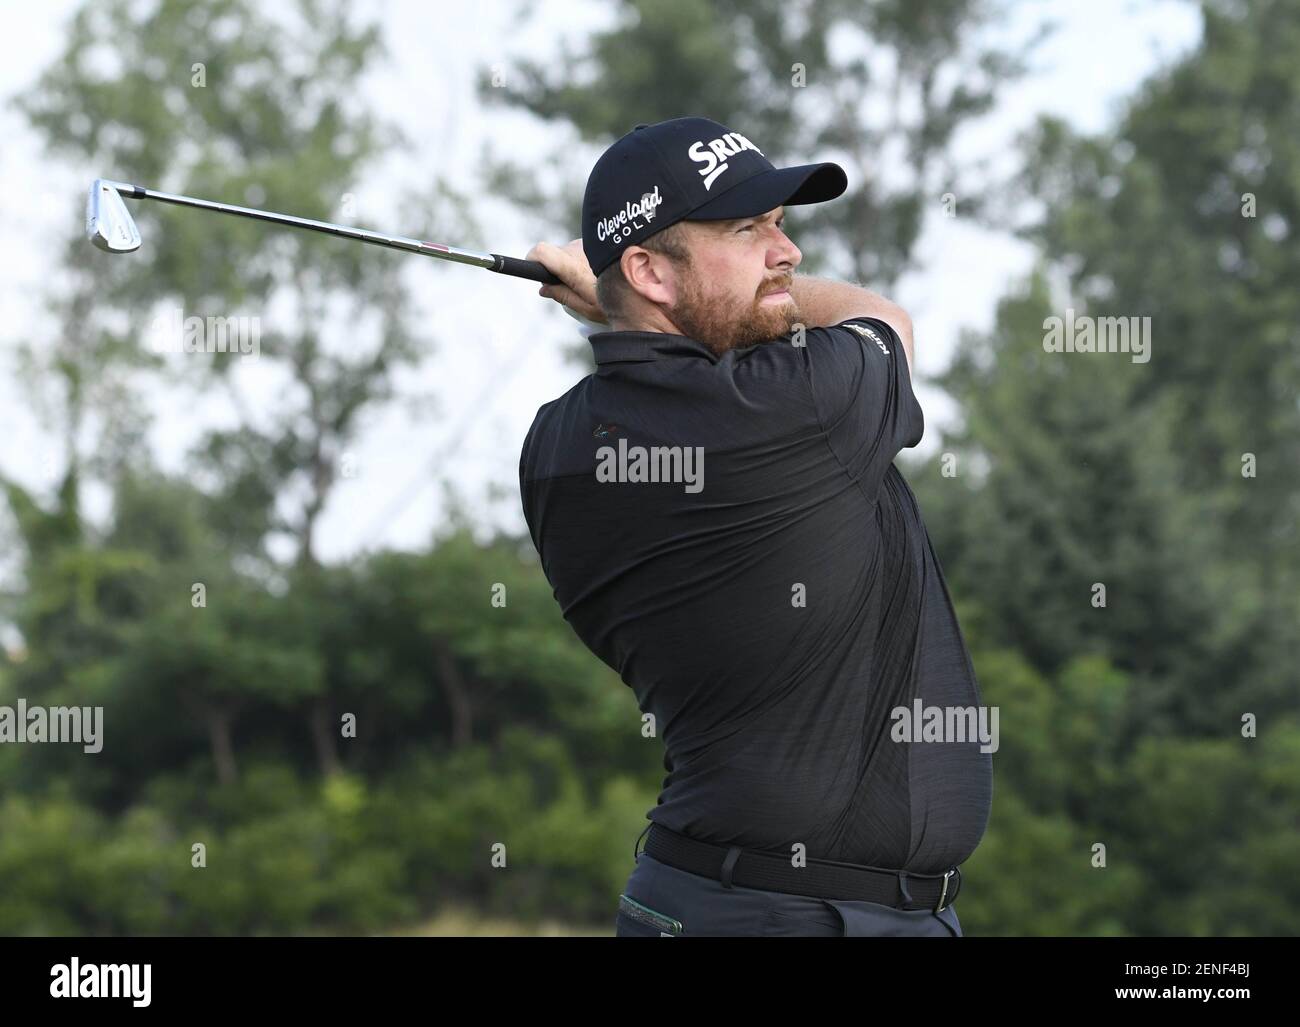 Aug 8, 2019; Jersey City, NJ, USA; Shane Lowry watches his tee shot on the 3rd hole during the first round of The Northern Trust golf tournament at Liberty National Golf Course. Mandatory Credit: Mark Konezny-USA TODAY Sports/Sipa USA Stock Photo